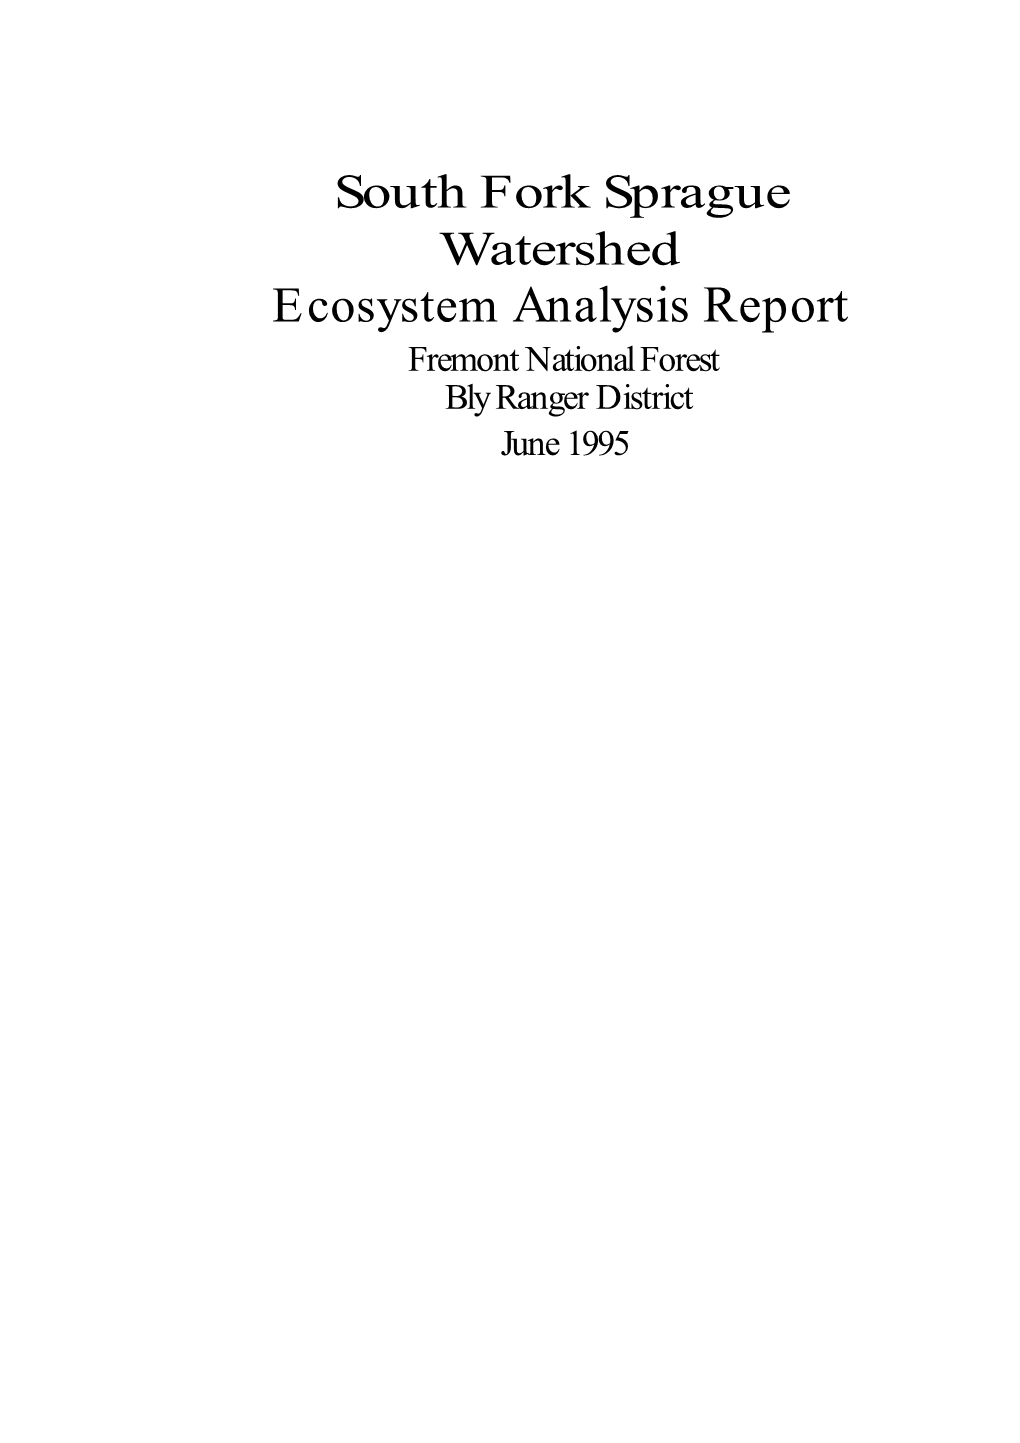 South Fork Sprague River Watershed Table of Contents